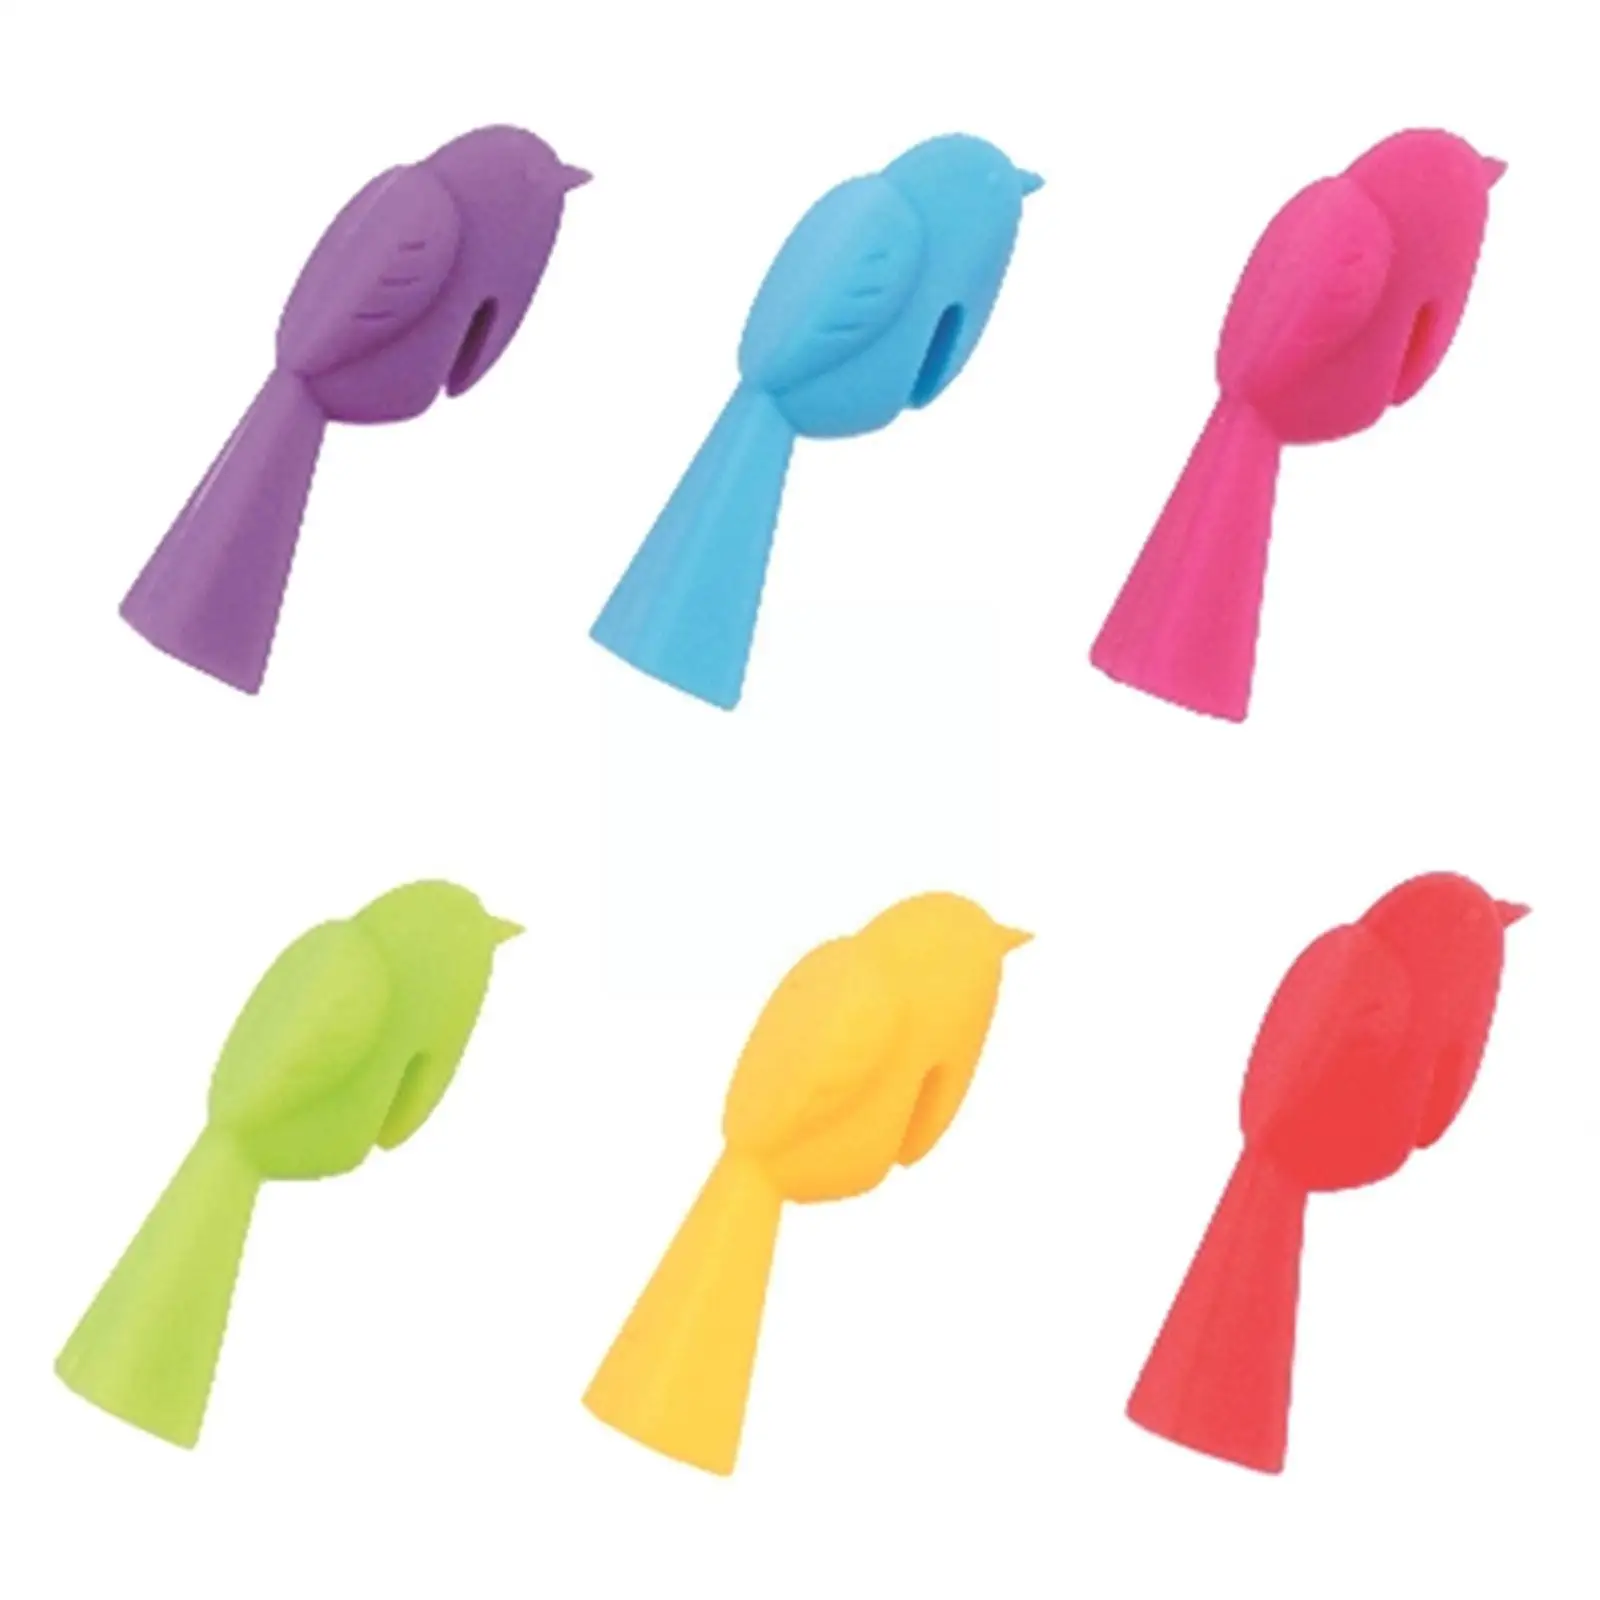 

Cute Silicone Bird Wine Glass Markers For Drinks, Cocktail Drink Markers Glass Tags Suitable For Parties Bottles Identifica P7w0